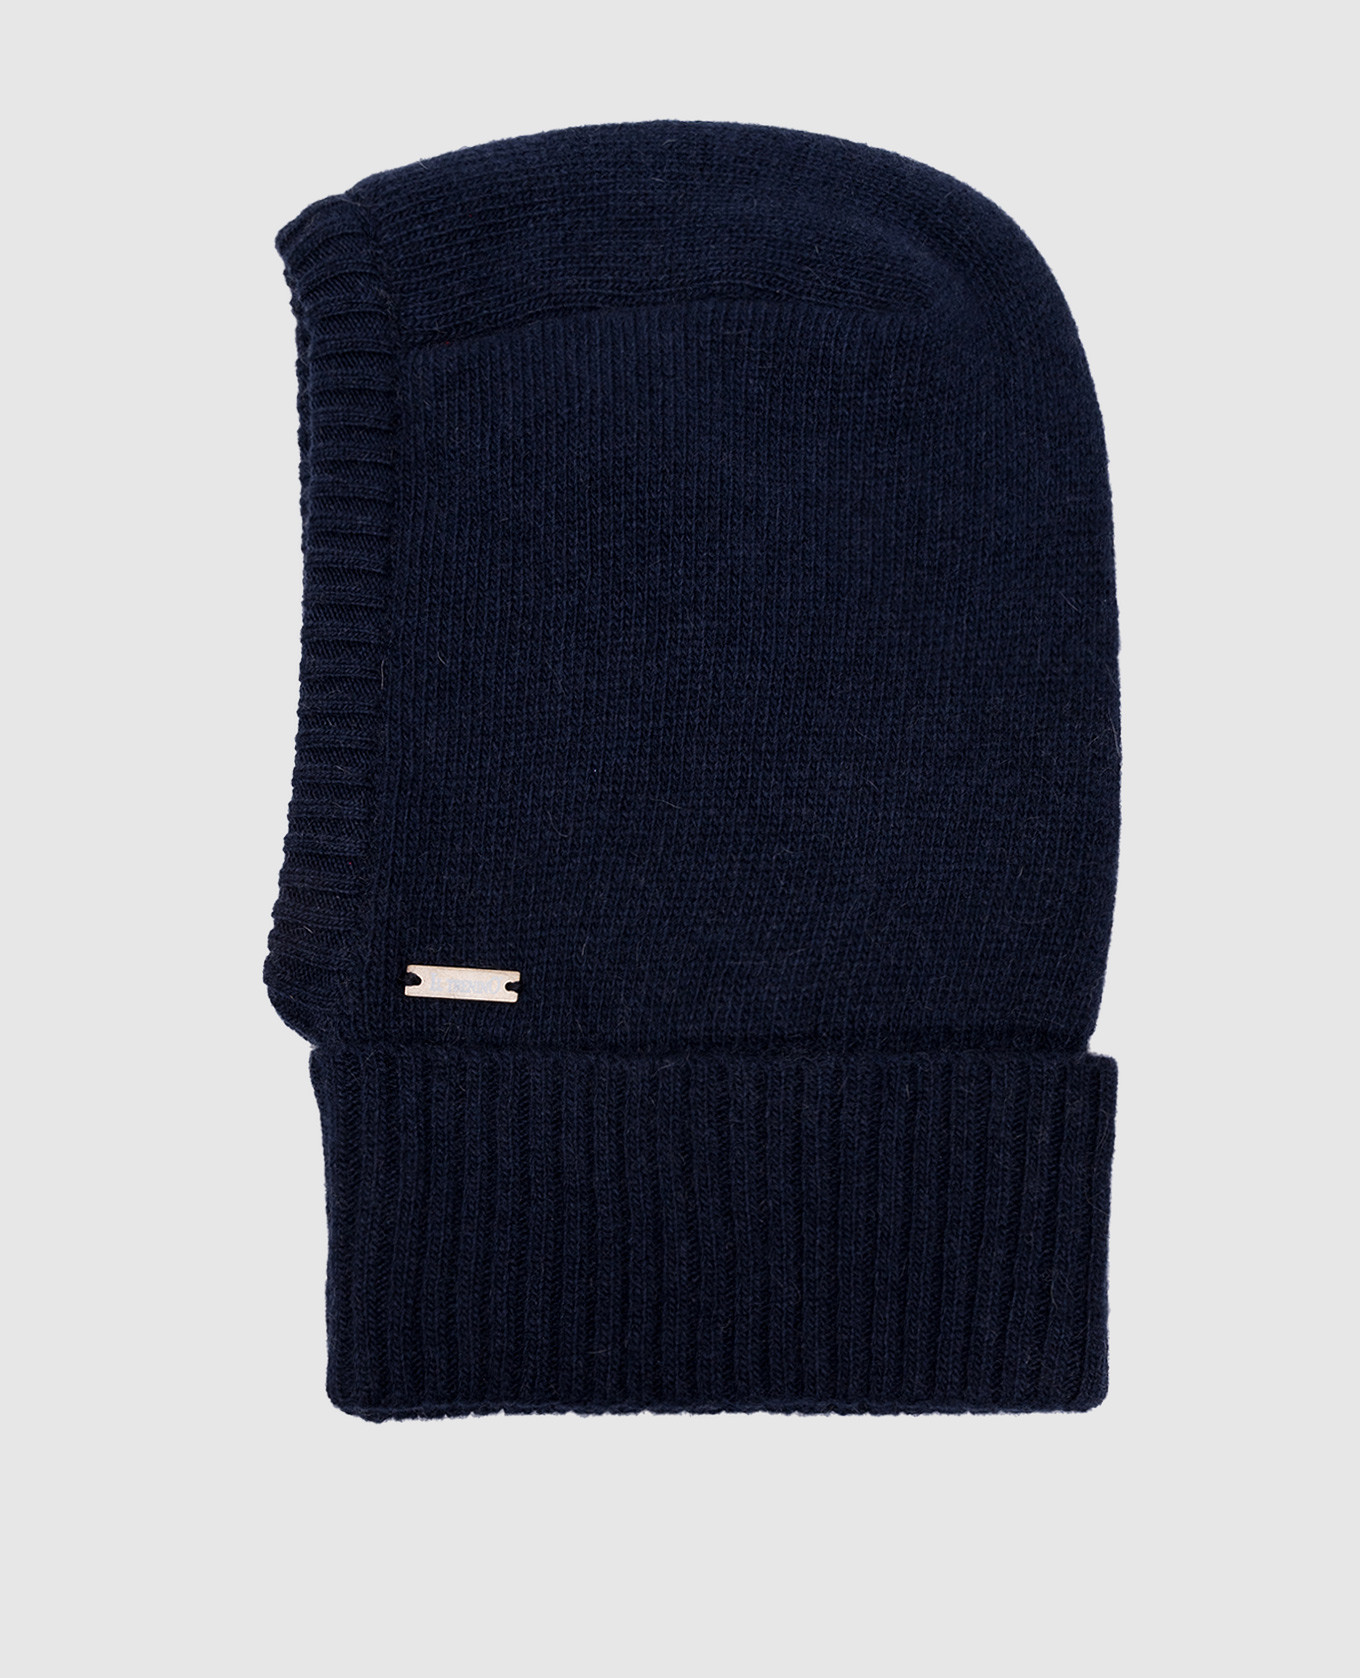 Children's blue cap-helmet made of wool and cashmere